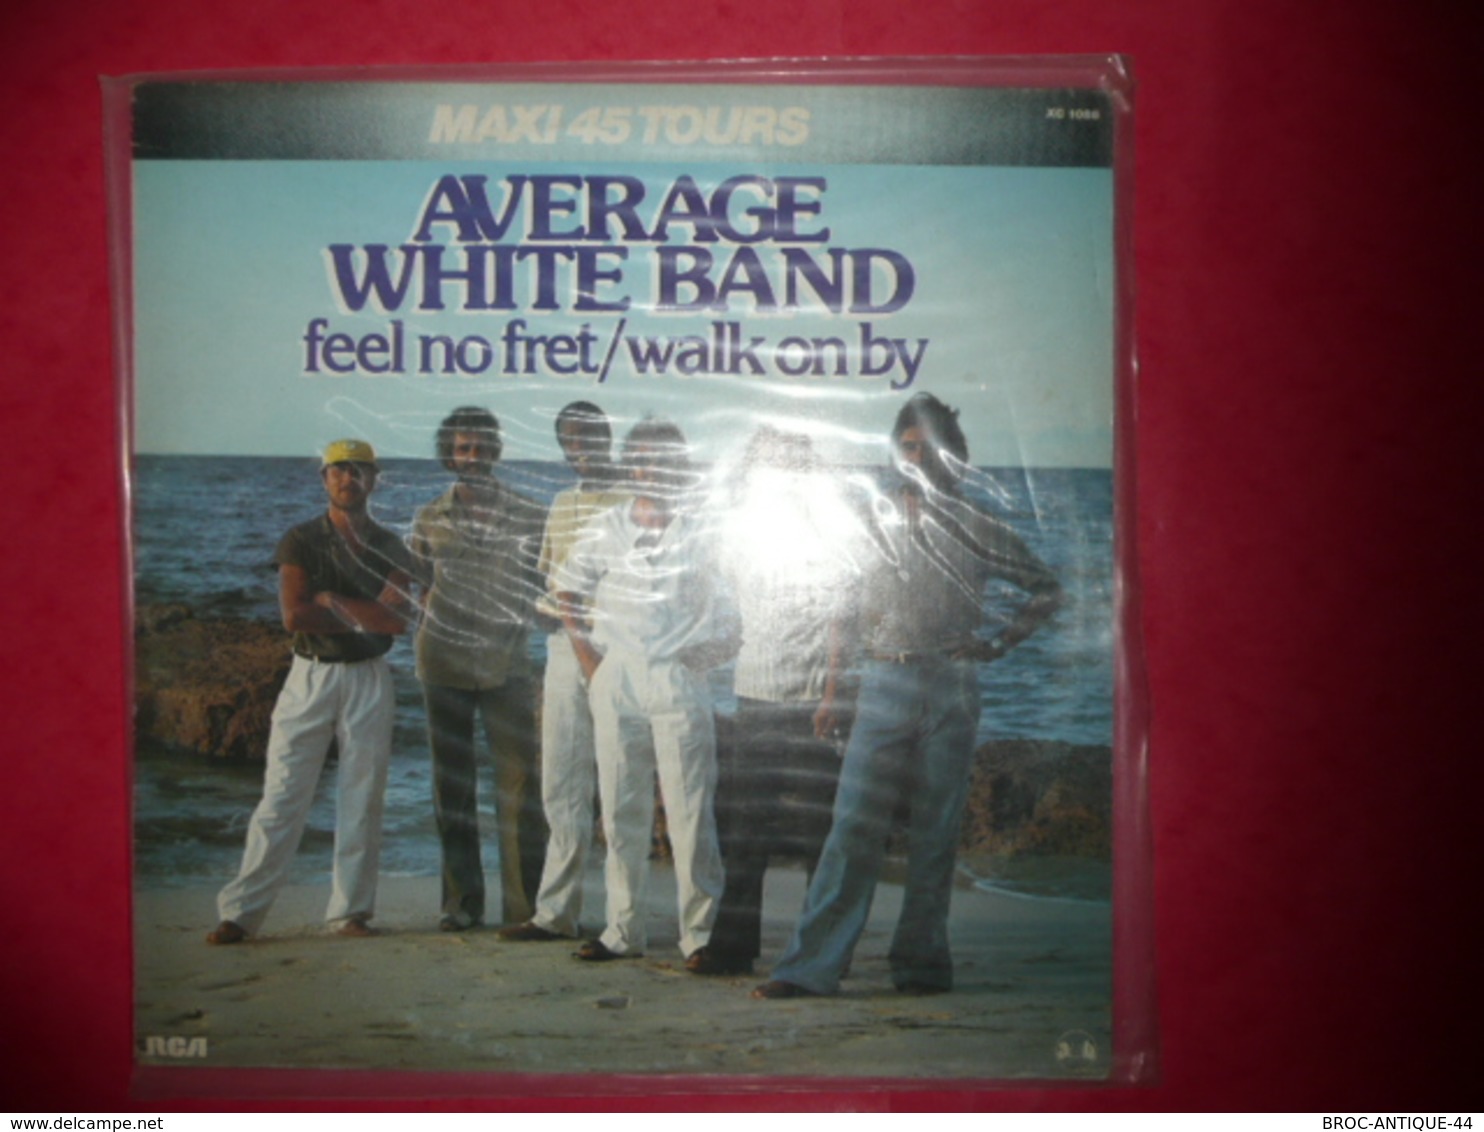 LP33 N°429 - AVERAGE WHITE BAND - FEEL NO FRET / WALK ON BY - COMPILATION 2 TITRES FUNK SOUL - 45 Rpm - Maxi-Singles